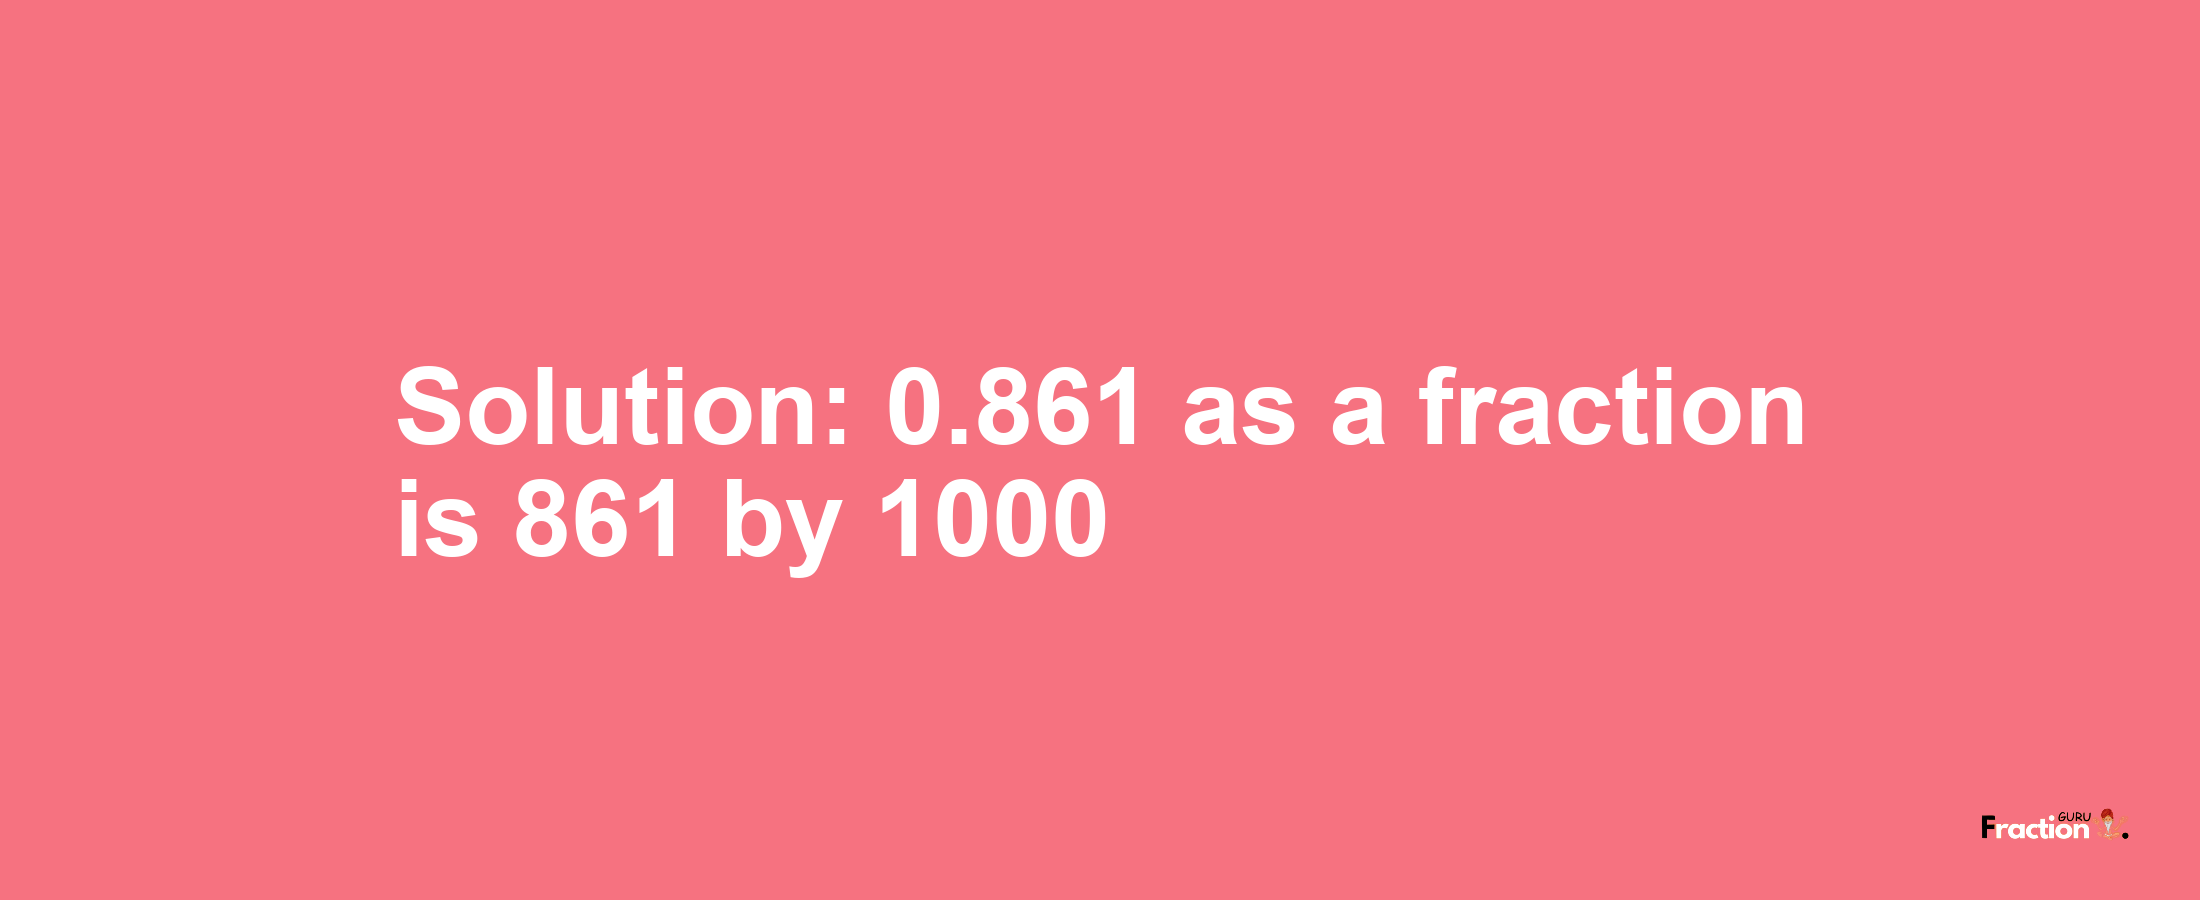 Solution:0.861 as a fraction is 861/1000